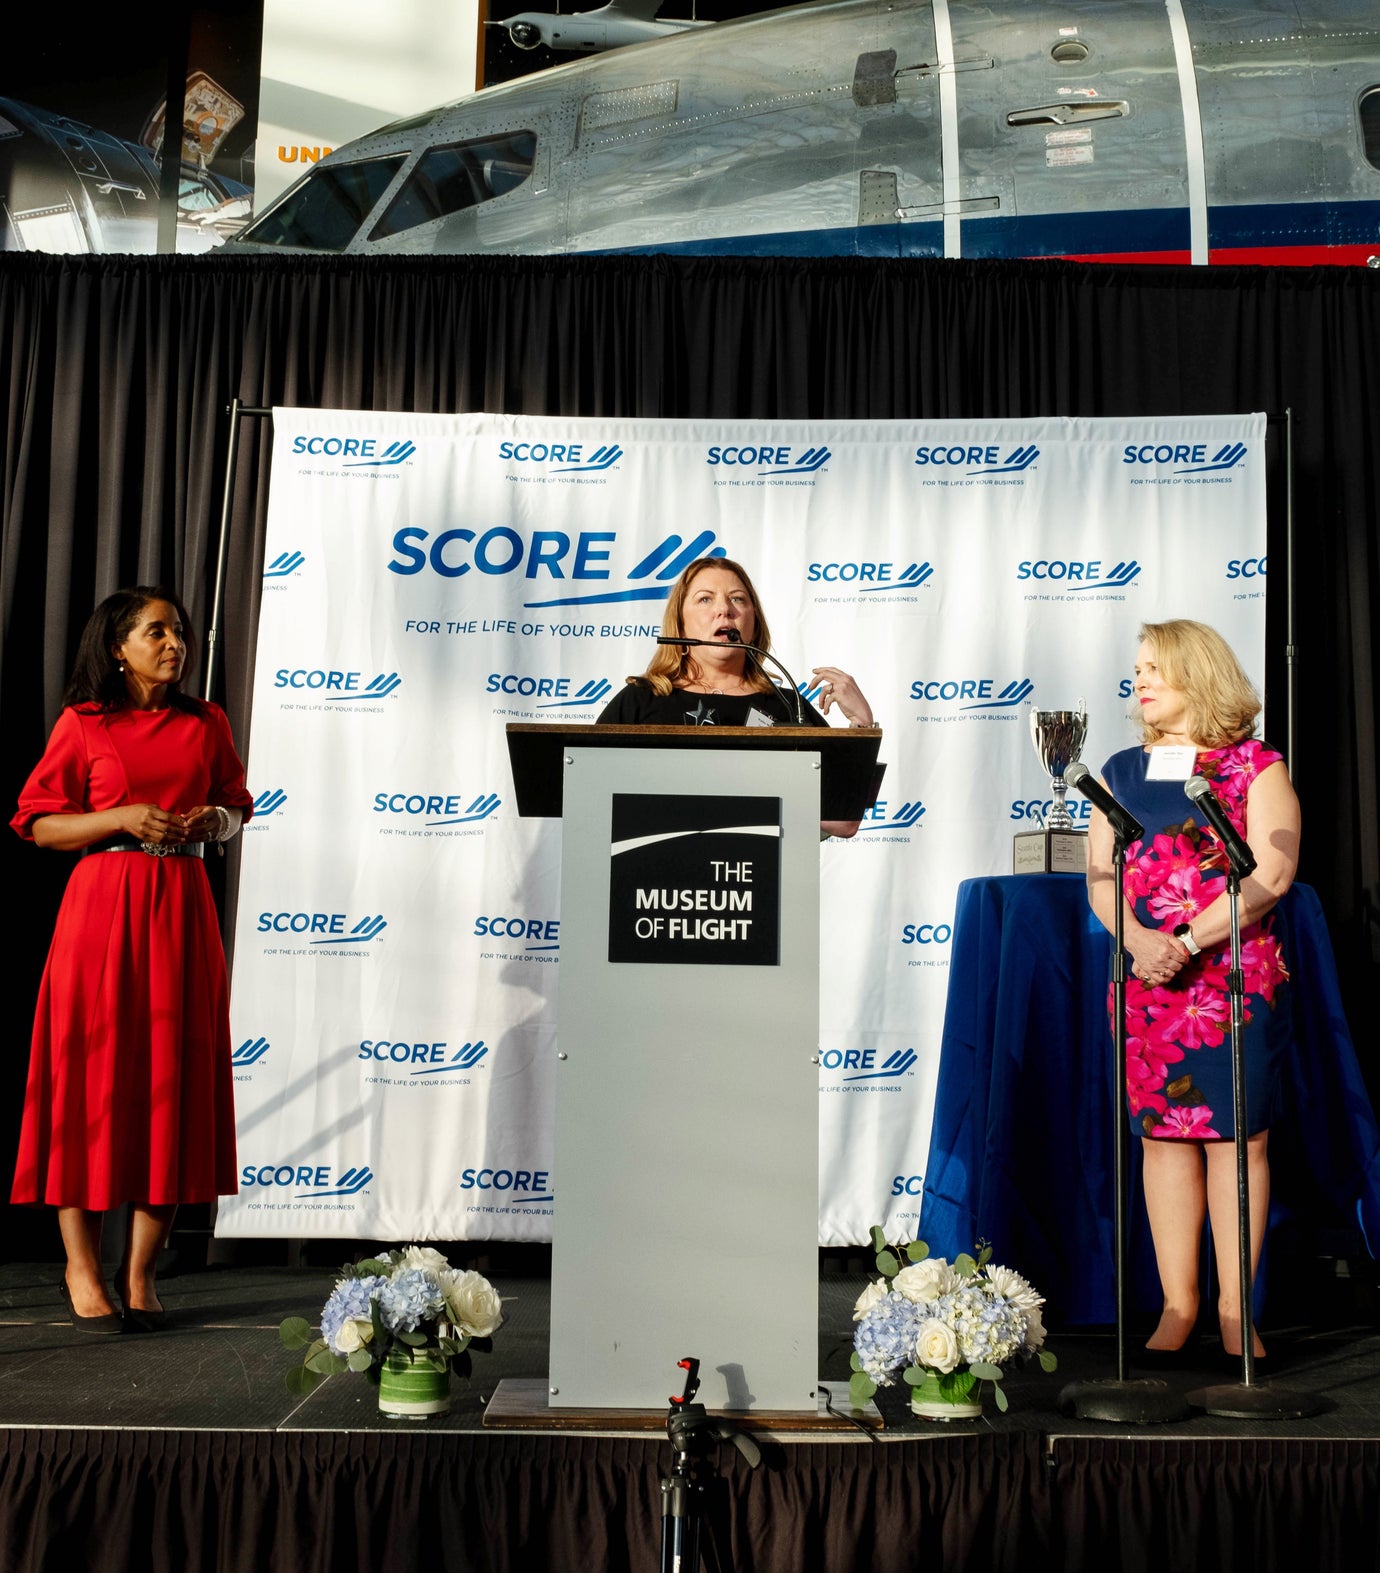 Angela Poe Russell, Katie McMurray, and Jennifer Dye standing on stage while Katie speaks to an audience at the podium